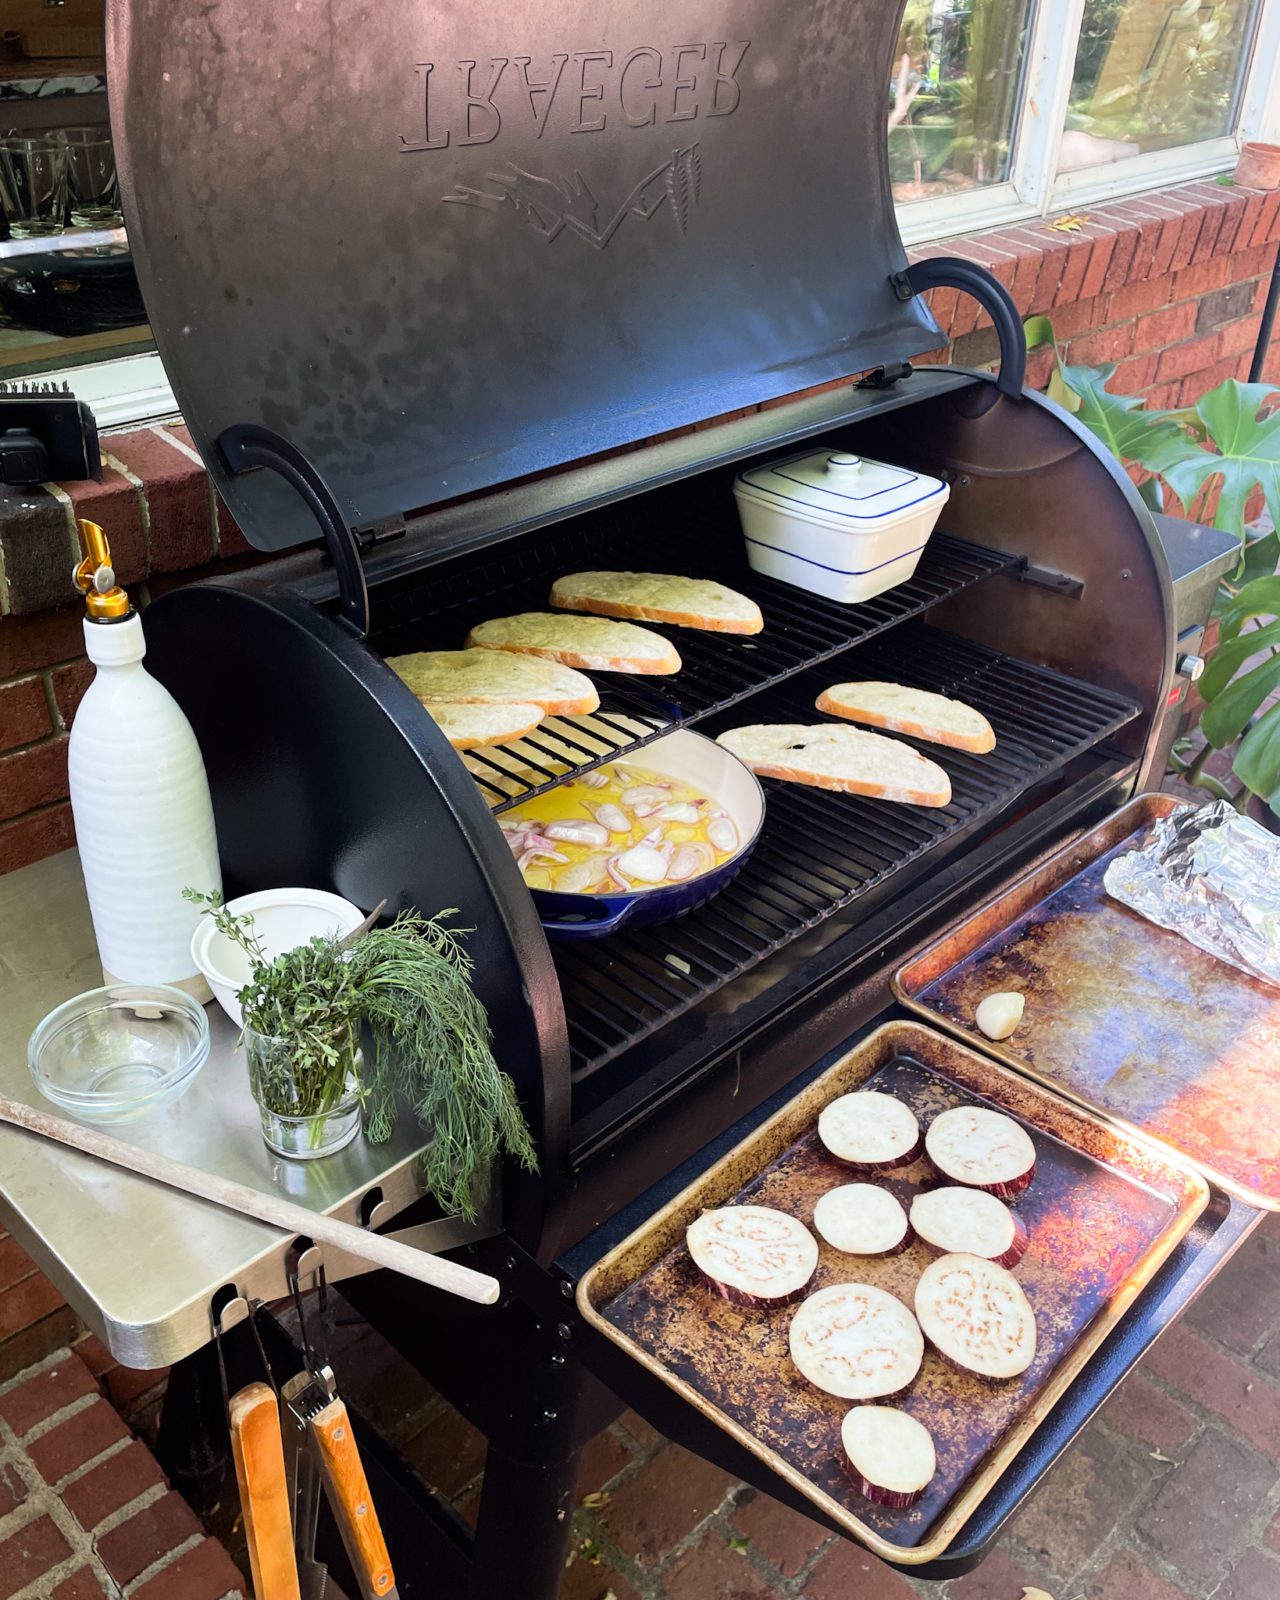 Make This Easy, Flavorful Meal Entirely on Your Grill | Wit & Delight